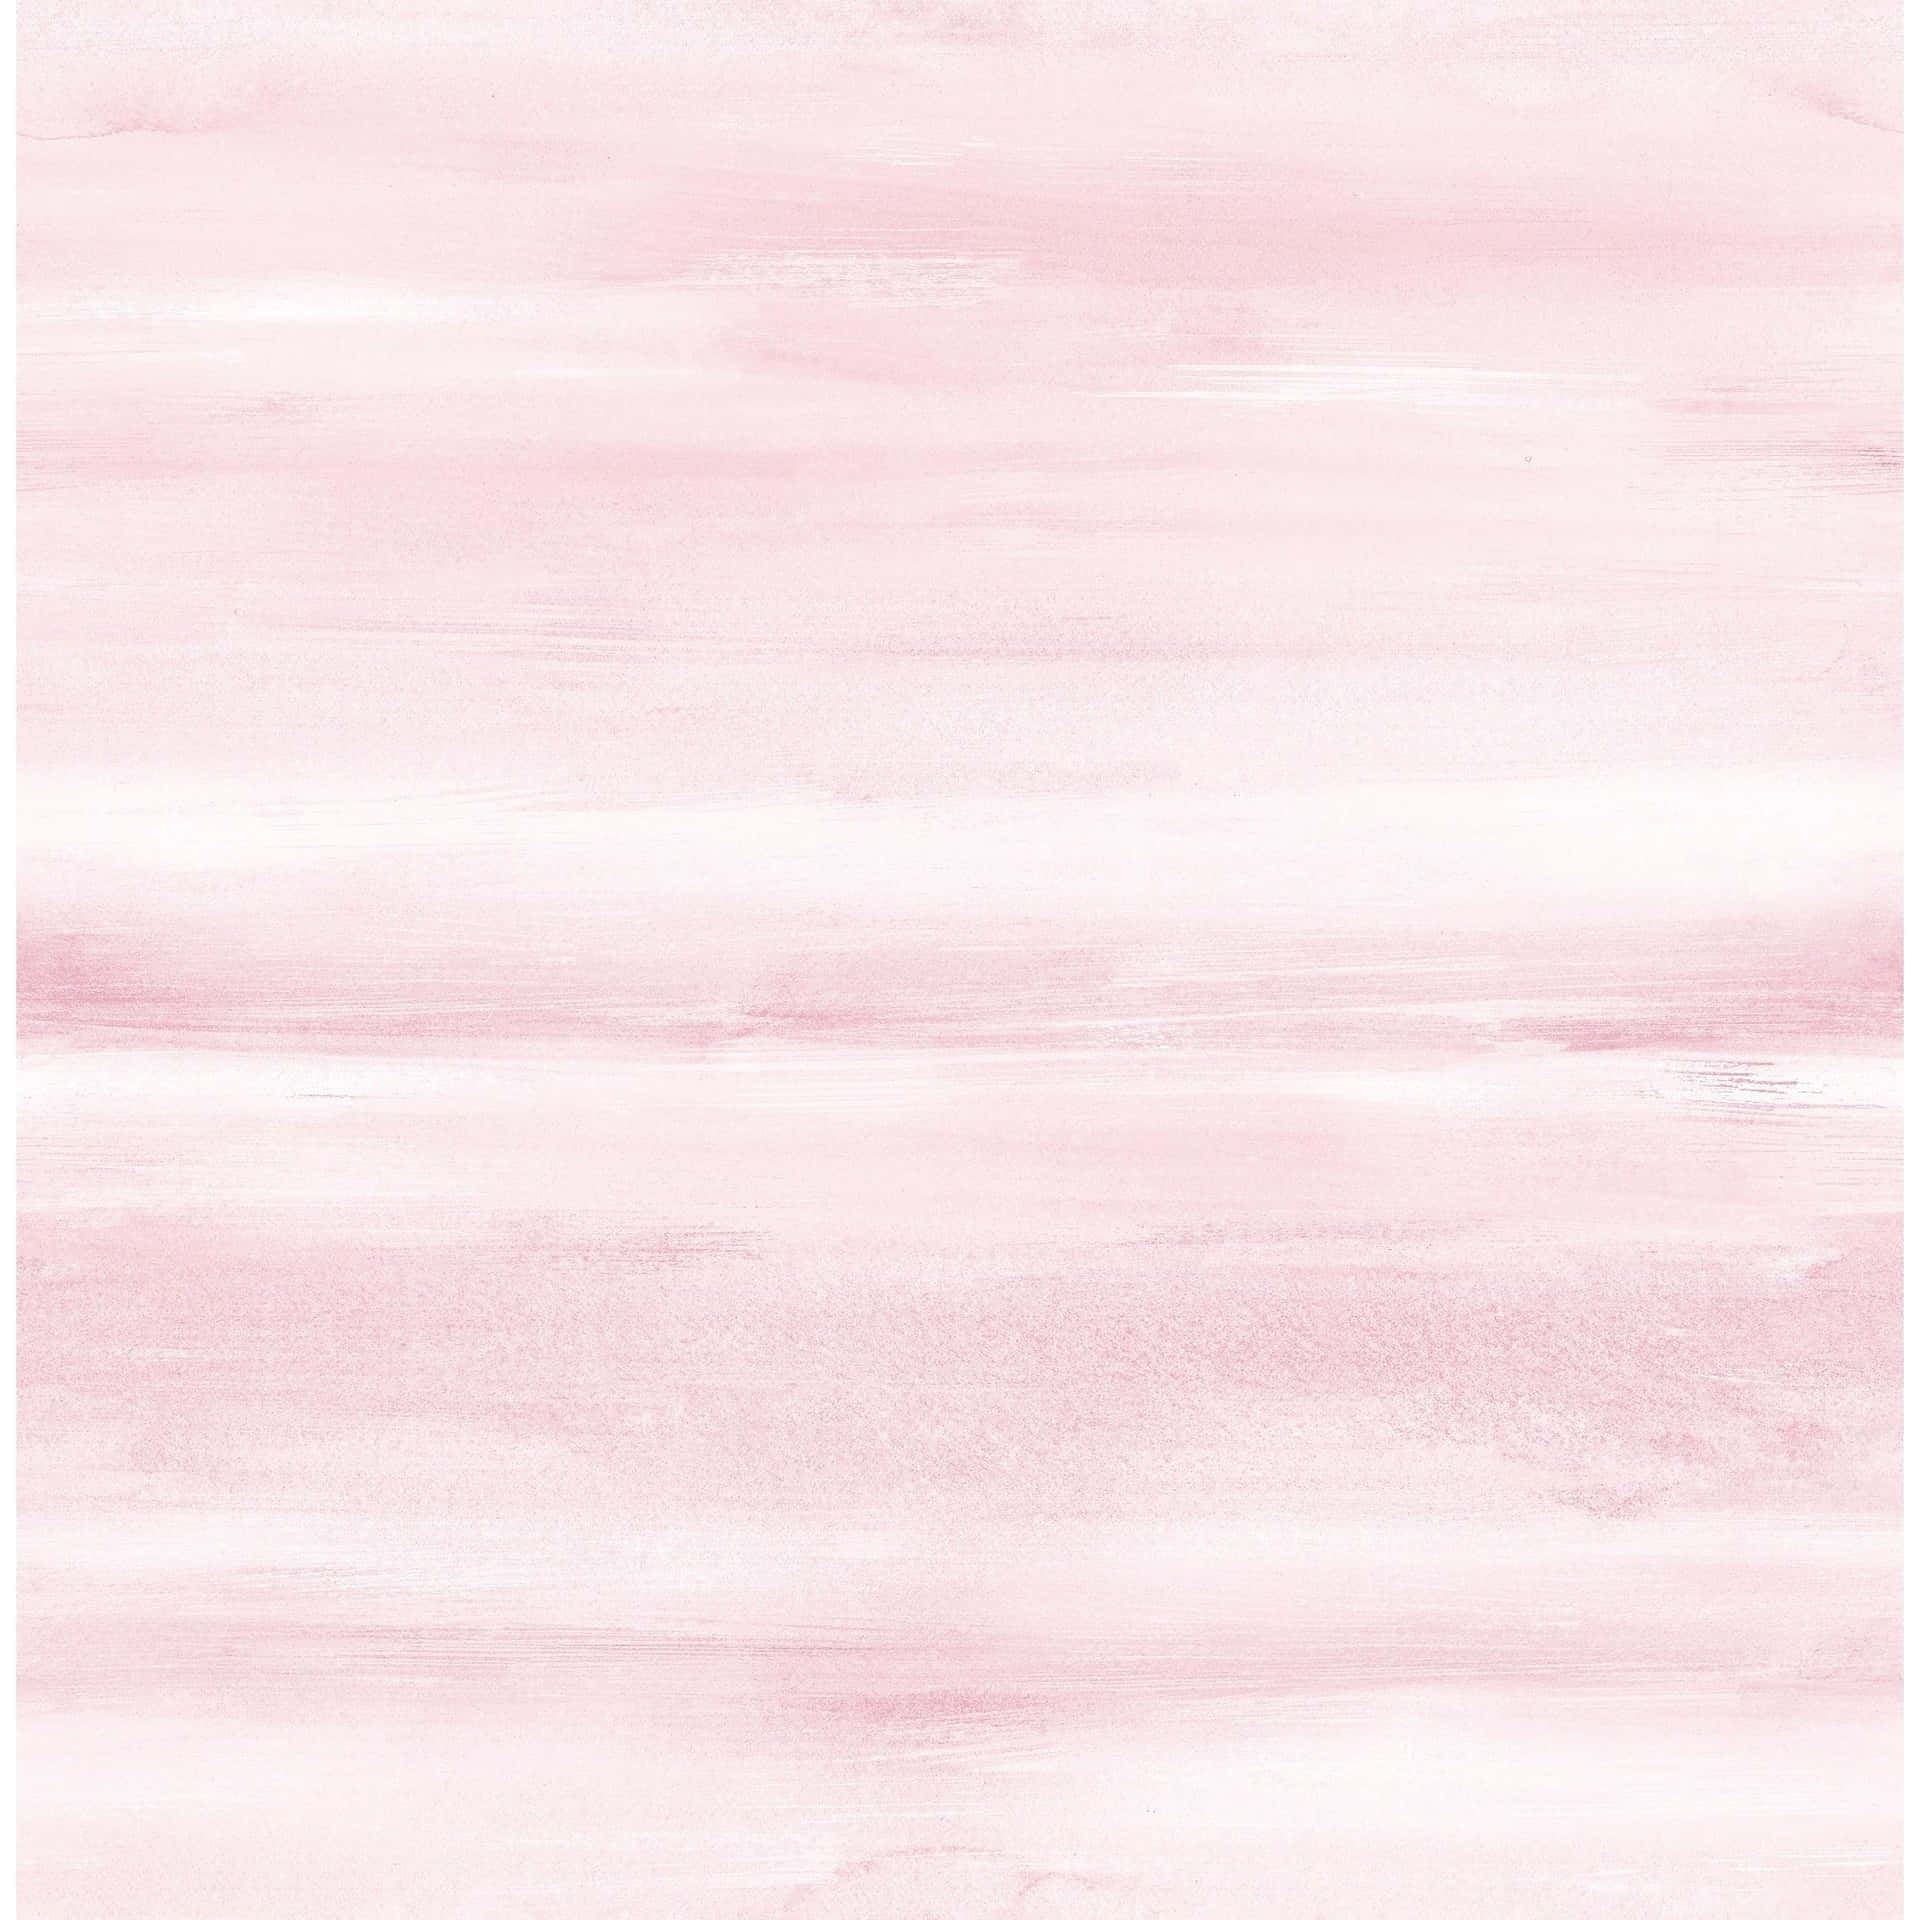 A soft pink and vibrant watercolor painting Wallpaper